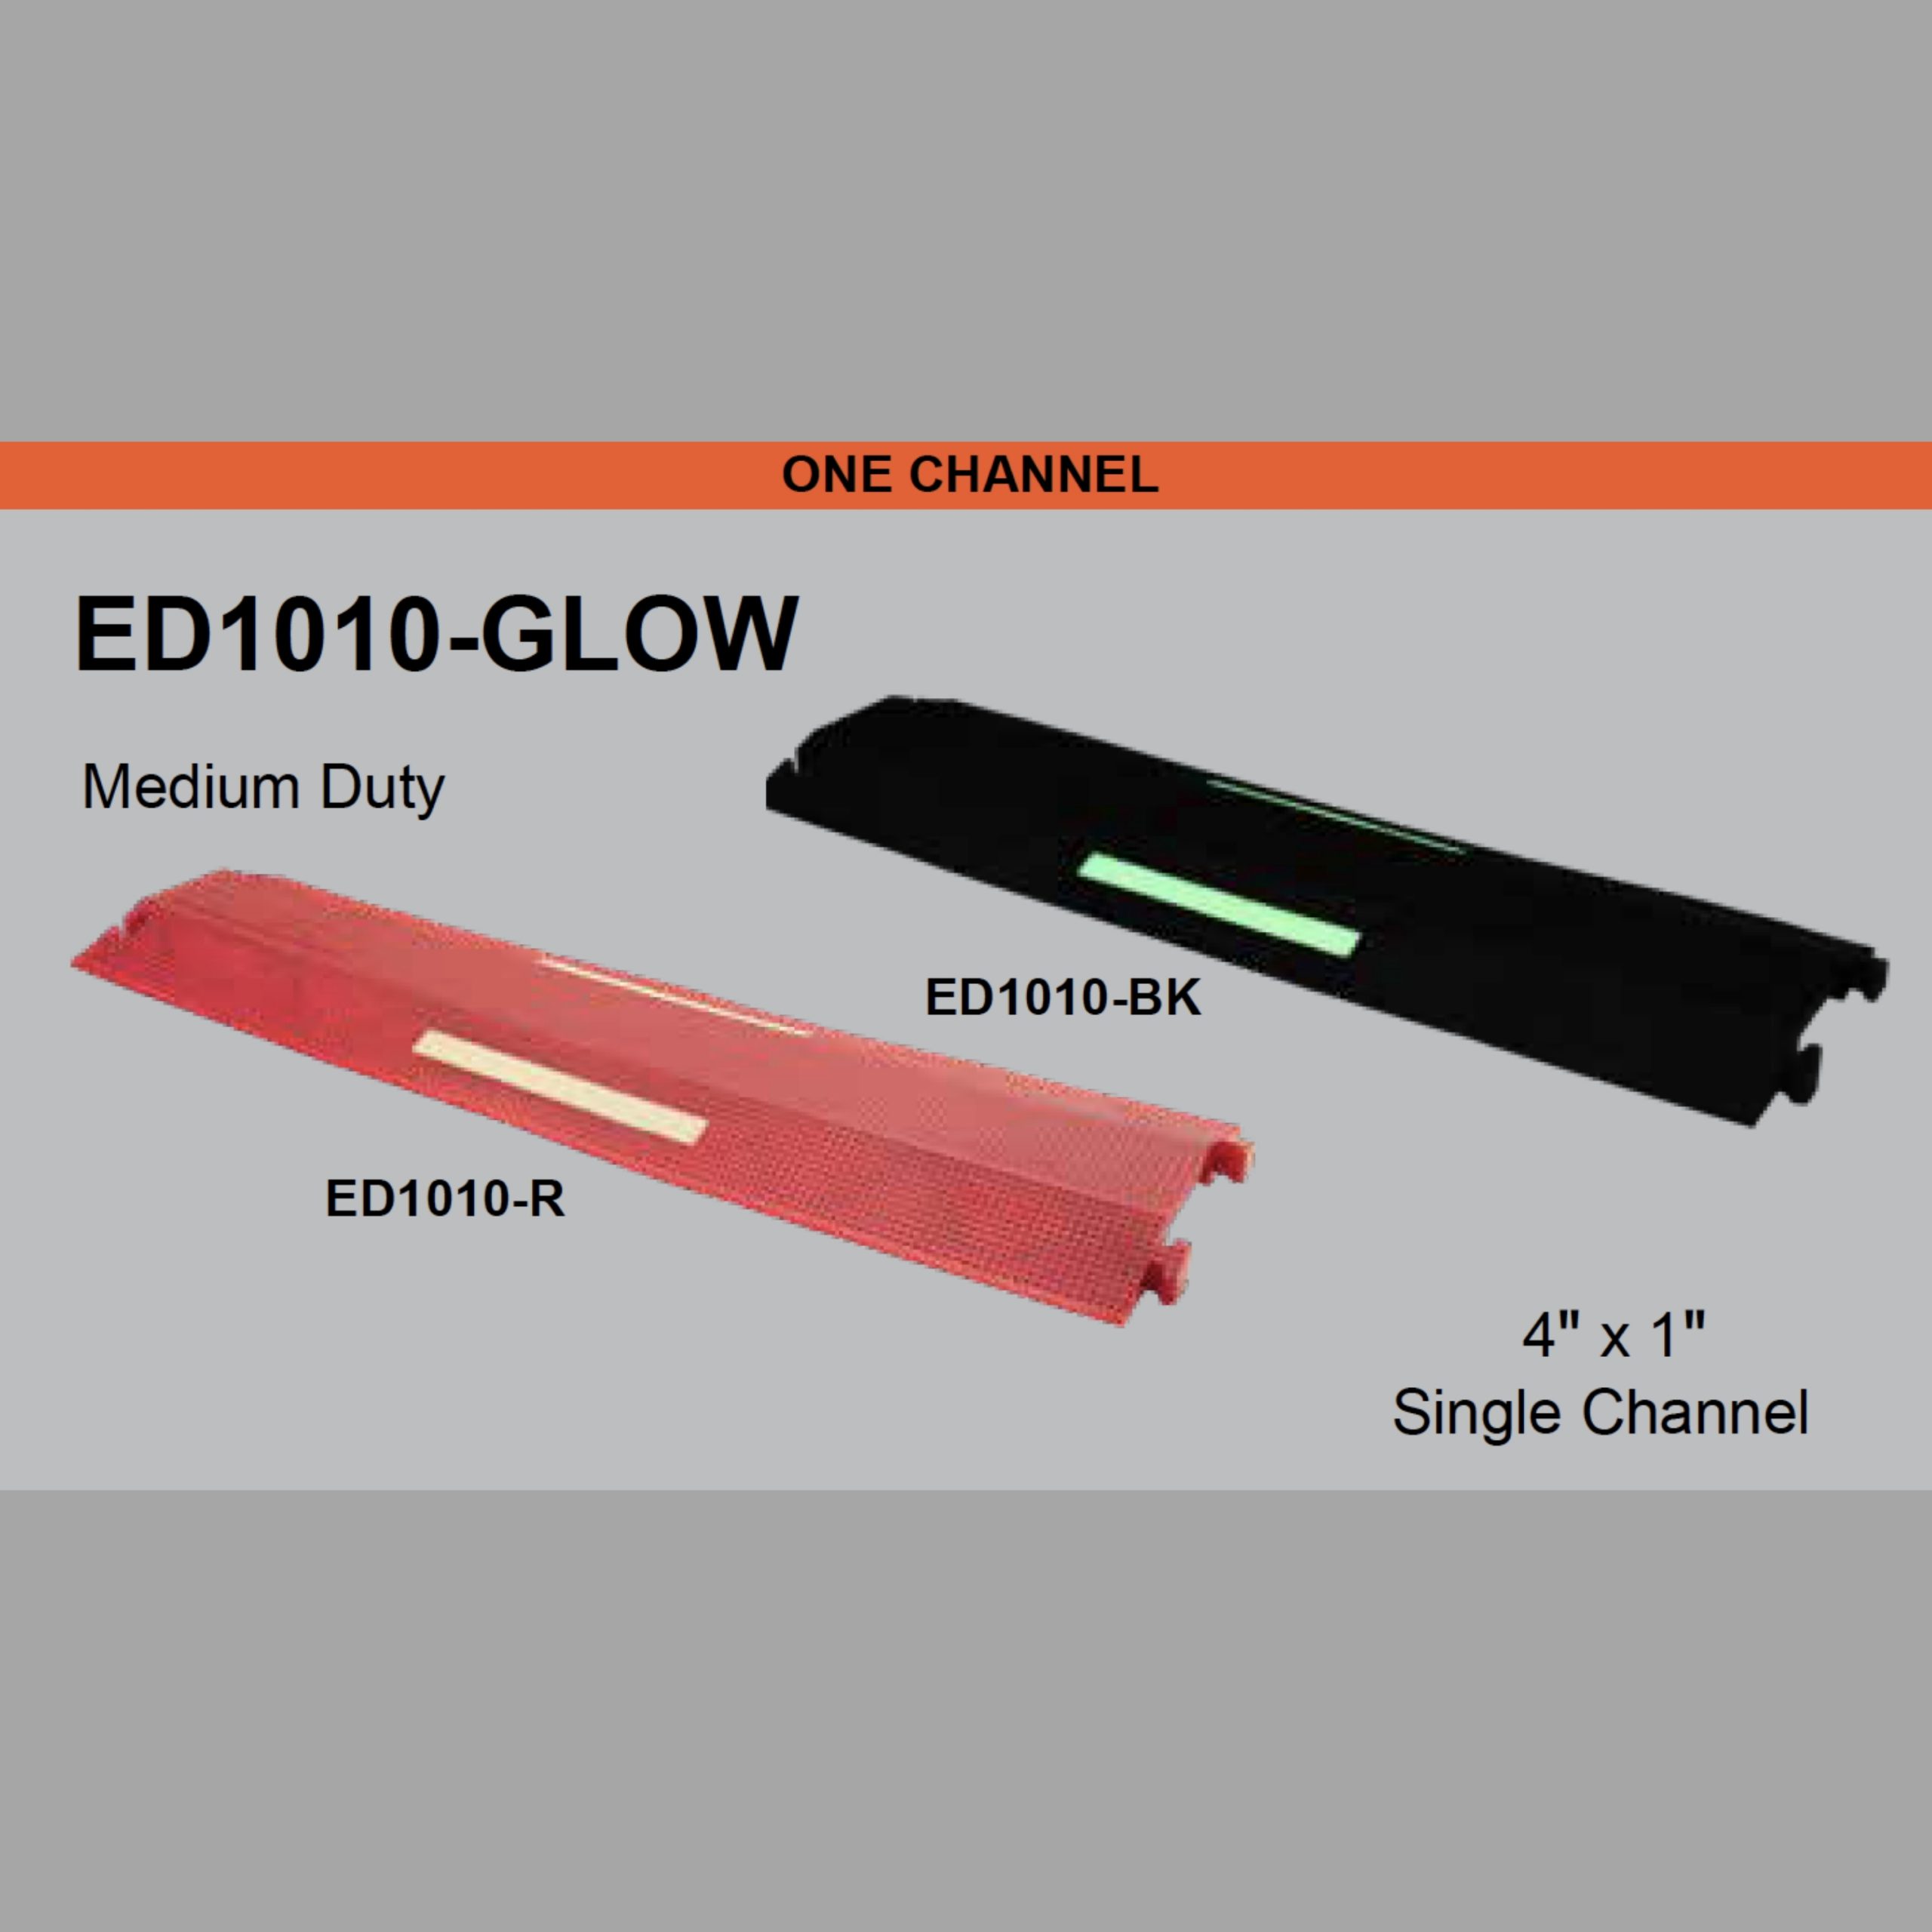 https://www.cableprotectorworks.com/wp-content/uploads/2021/04/Elasco-Products-Dropover-Cable-Cover-ED1010-R-GLOW-5-scaled.jpg